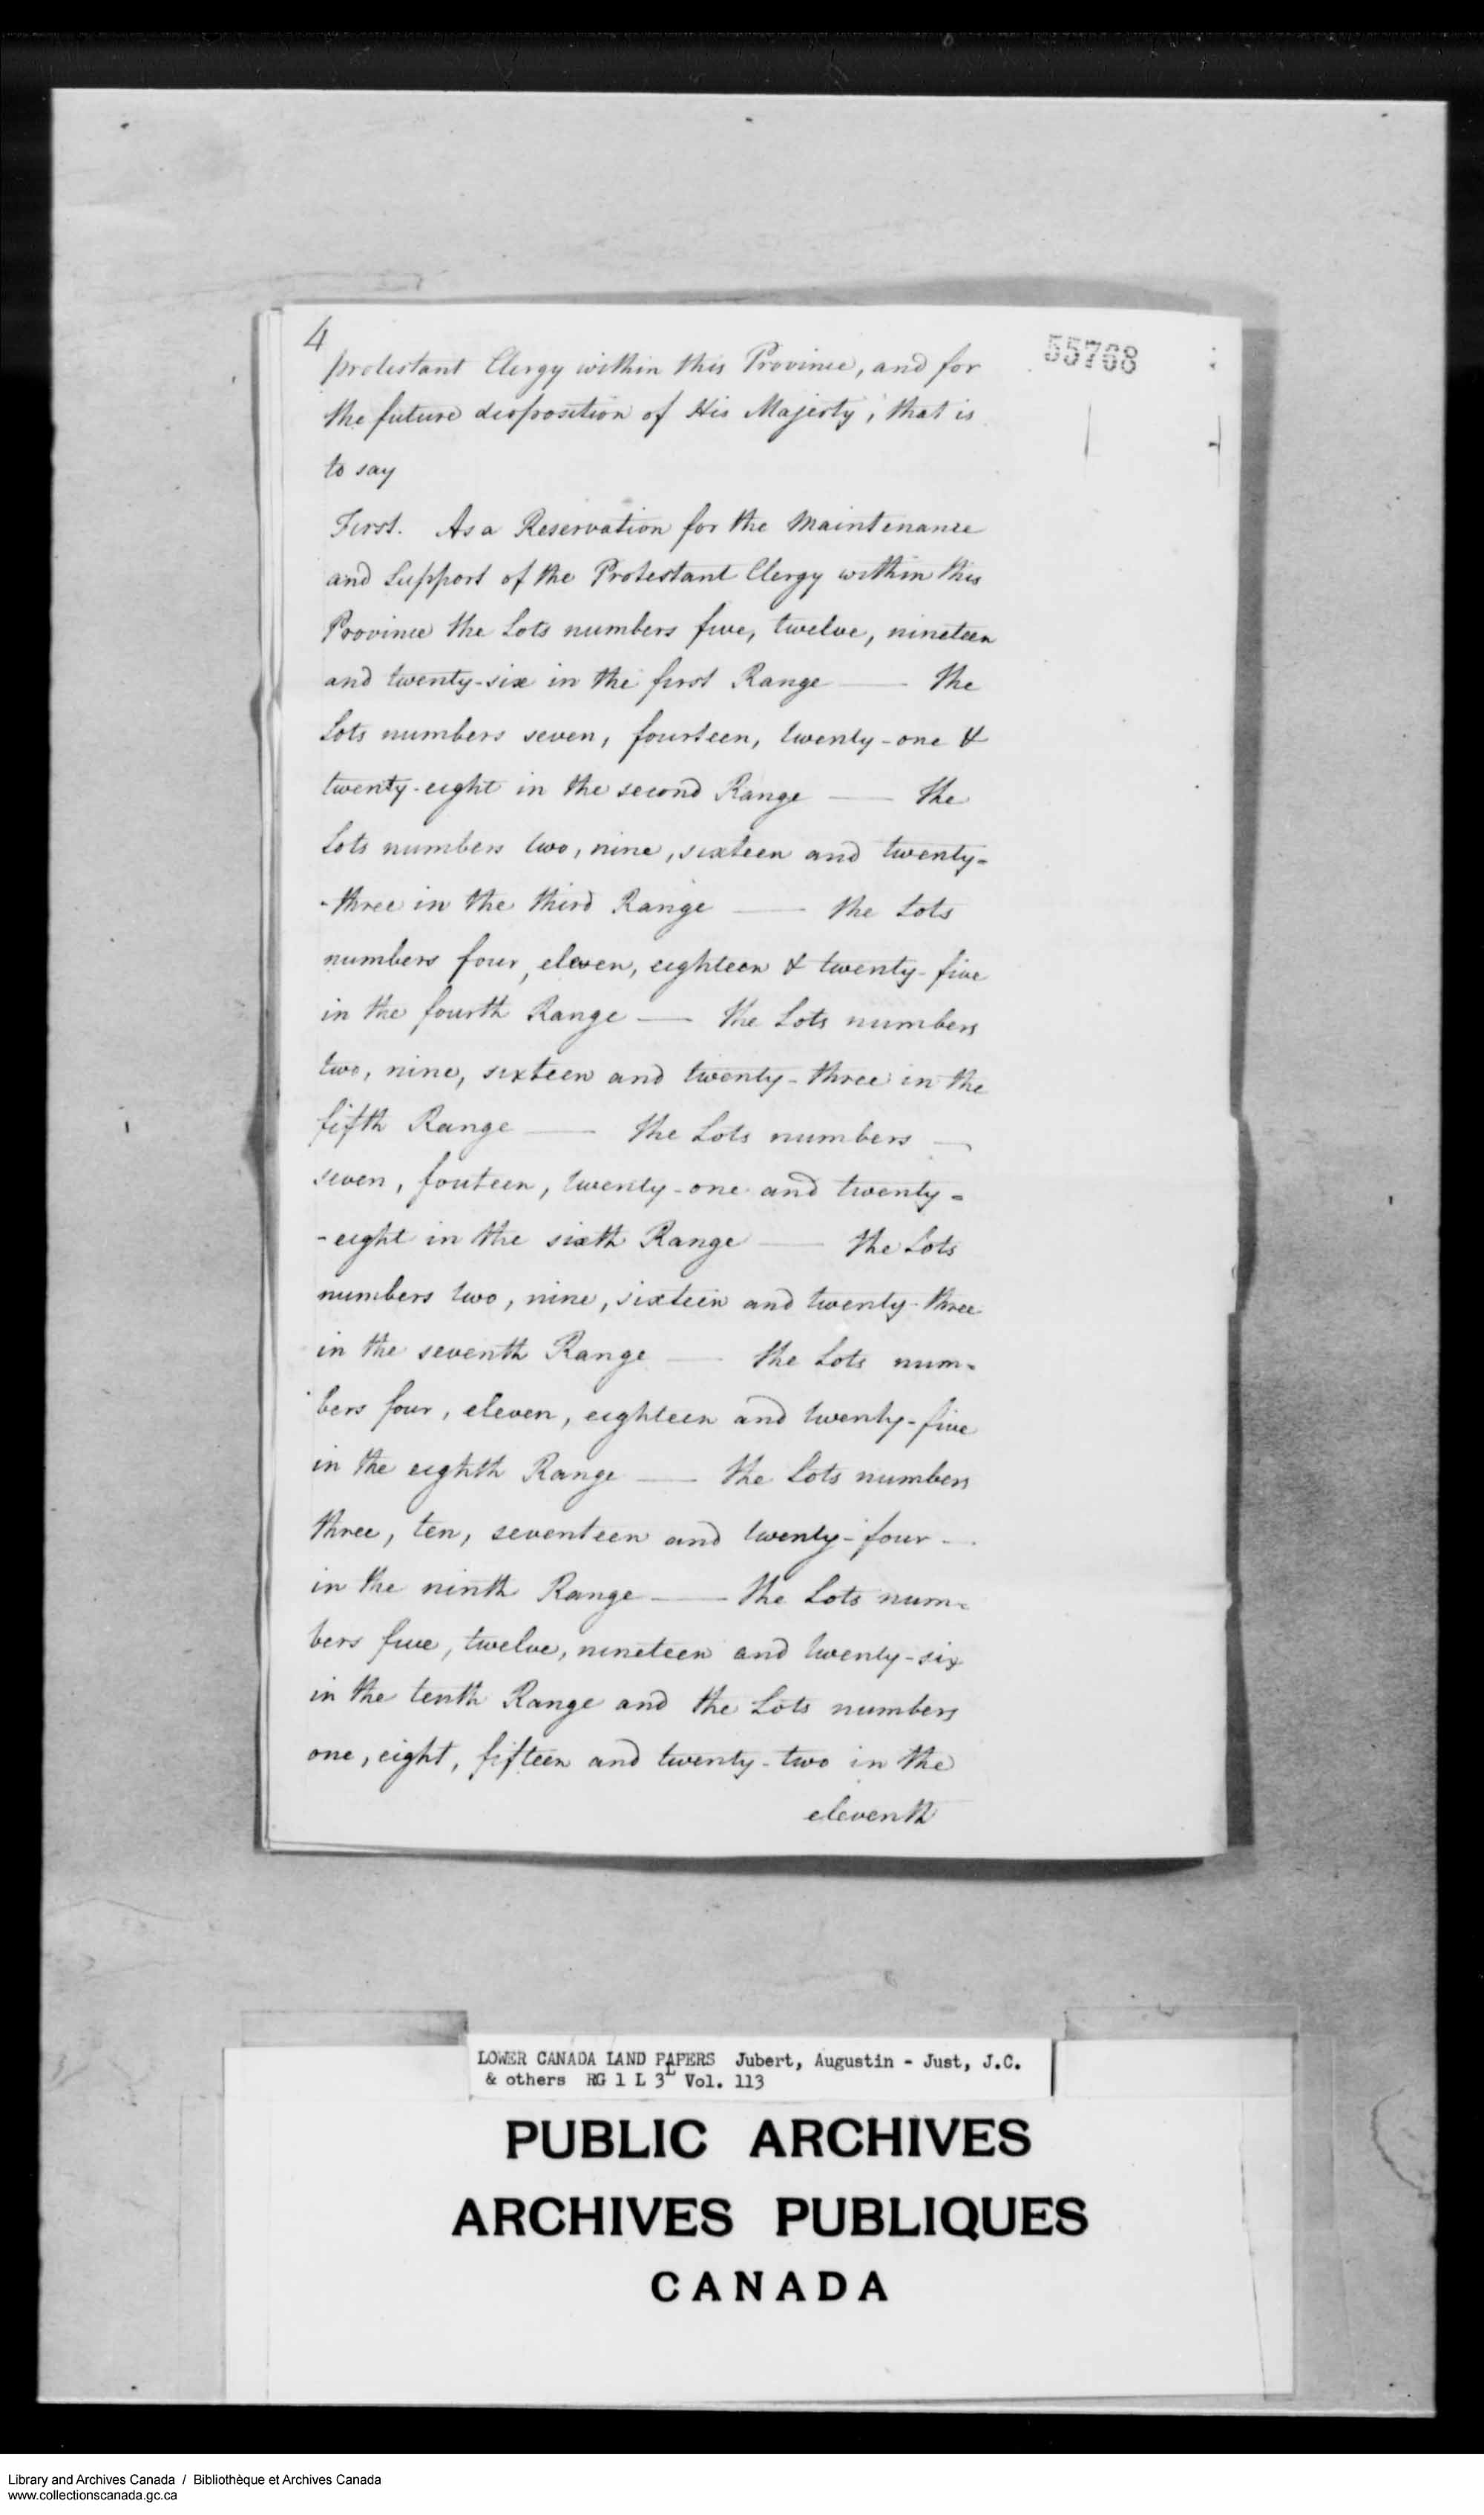 Digitized page of  for Image No.: e008700256